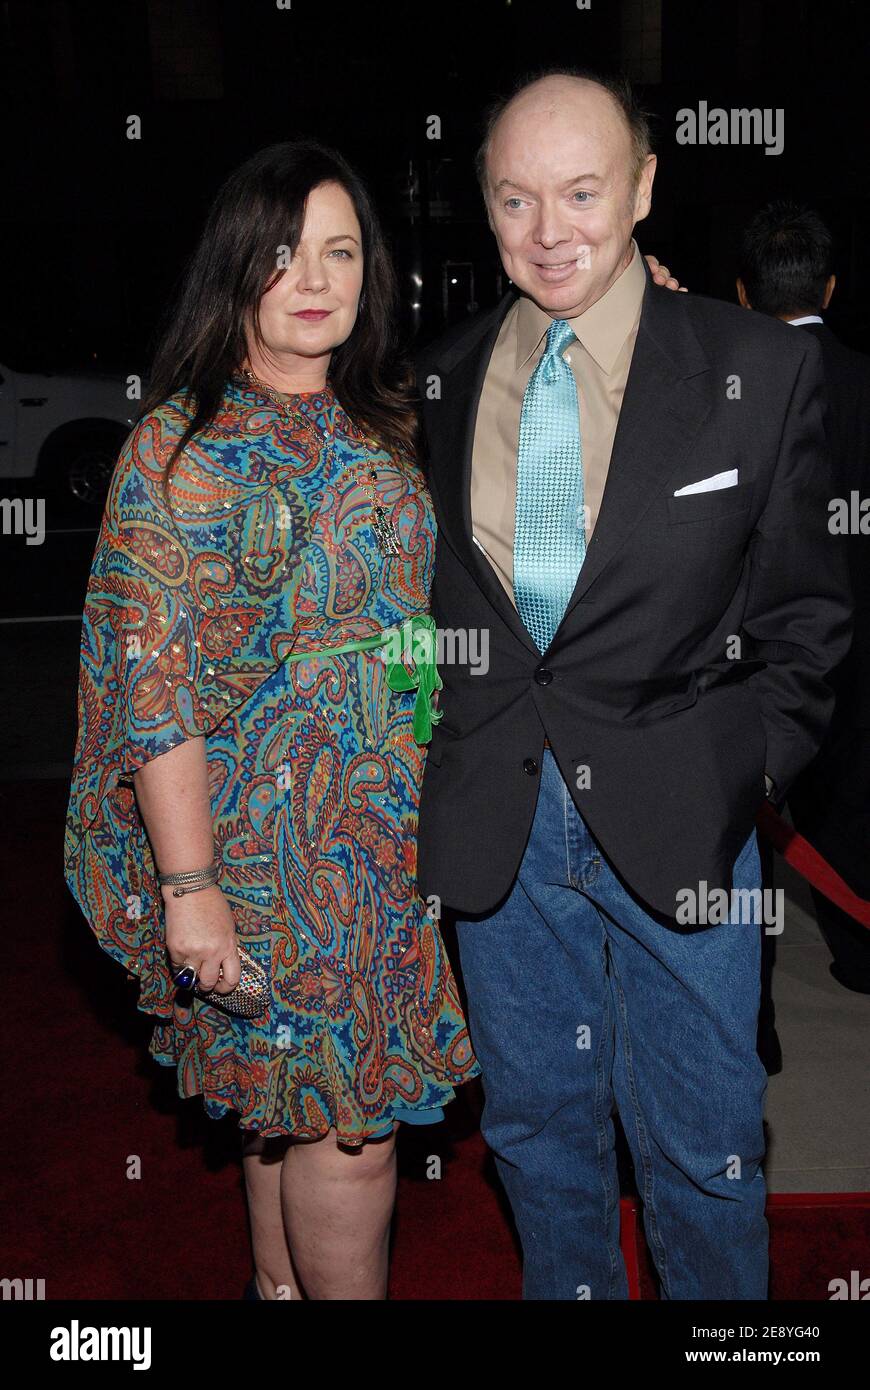 Bud Cort and Jennifer Nicholson attend the premiere of 'The Darjeeling Limited' held at The Academy of Motion Picture Arts and Sciences in Beverly Hills, Los Angeles, CA, USA on October 4, 2007. Photo by Lionel Hahn/ABACAPRESS.COM Stock Photo